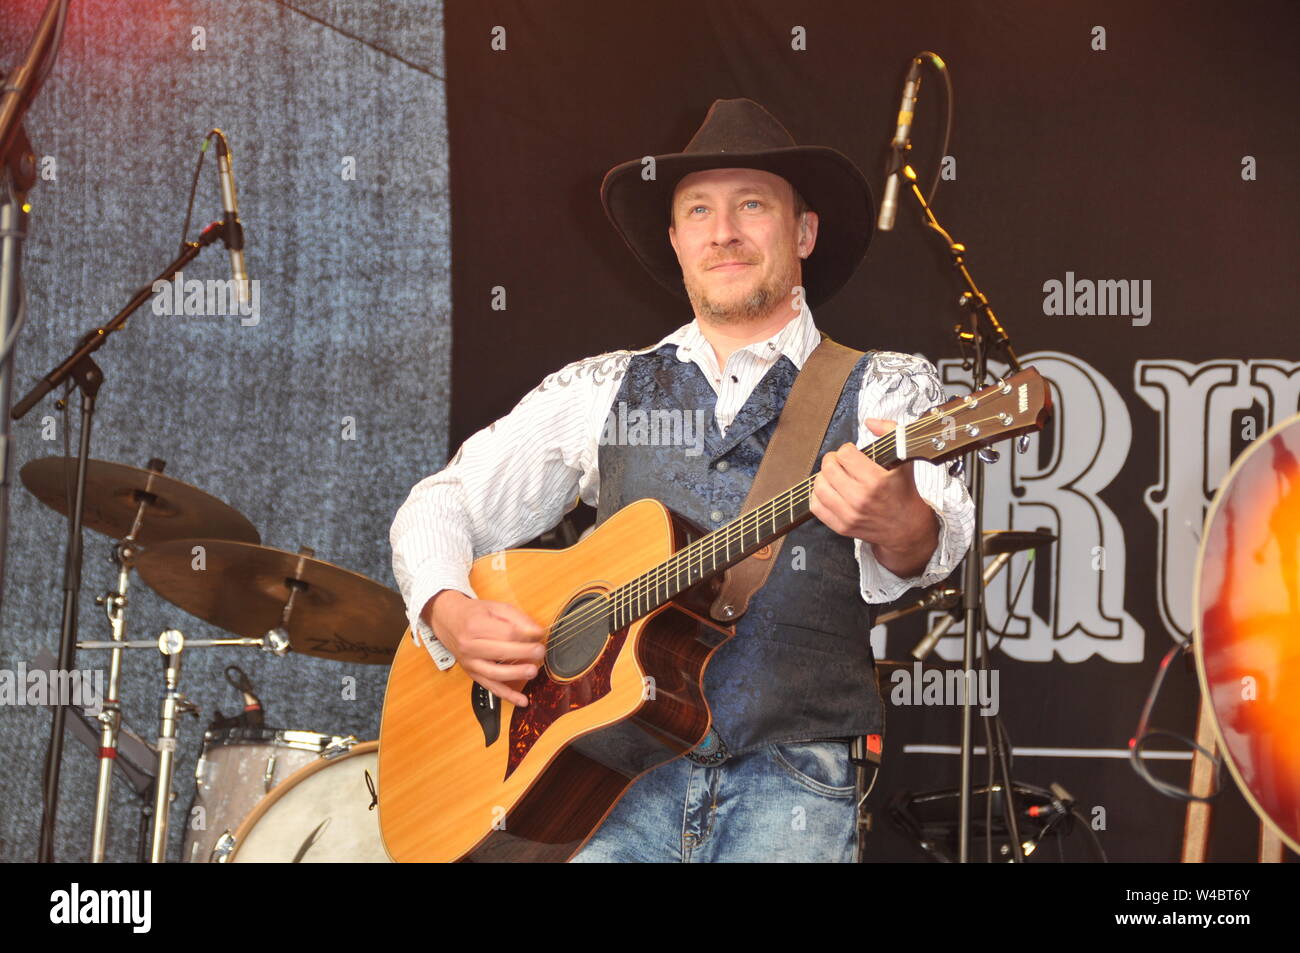 16 July 2019, Schleswig-Holstein, Heiligenhafen: TRUCK STOP - The Country Band from Waterkant on 16 July 2019 in Heiligenhafen at the Heiligenhafener Hafenfesttage (For the 44th time from 11 July to 21 July 2019) open air stage appearance dierkt at the harbour basin. From 20 - 22 o'clock there was Country Rock and songs from the brand new album 'Ein Stückchen Ewigkeit' for over two thousand guests of the event. Schleswig-Holstein, Germany, Europe. - Tim Reese, violin and guitar. Photo: Holger Kasnitz/dpa Stock Photo